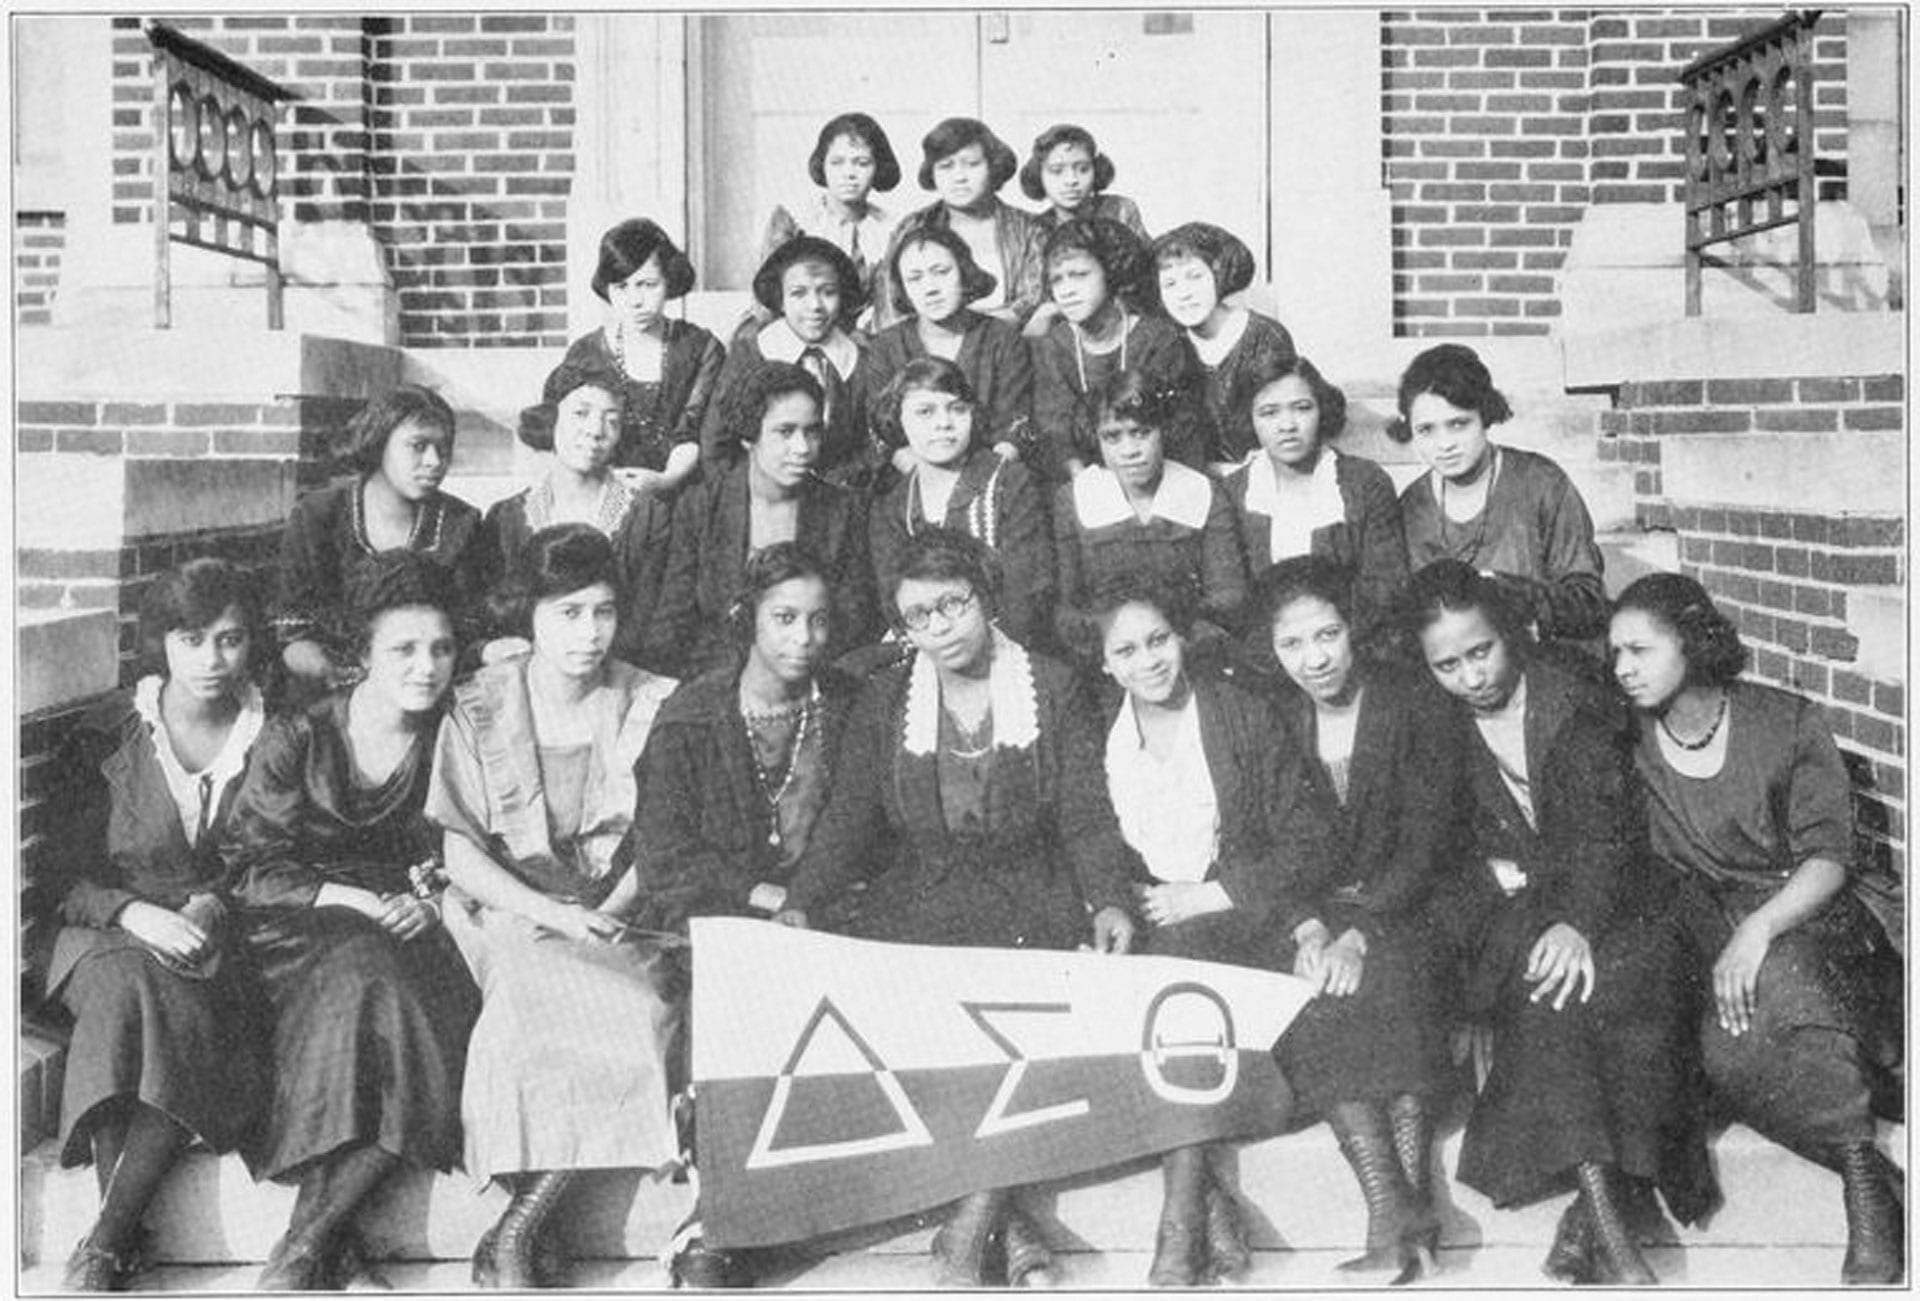 A group of women gathered on steps with a Delta Sigma Theta banner.